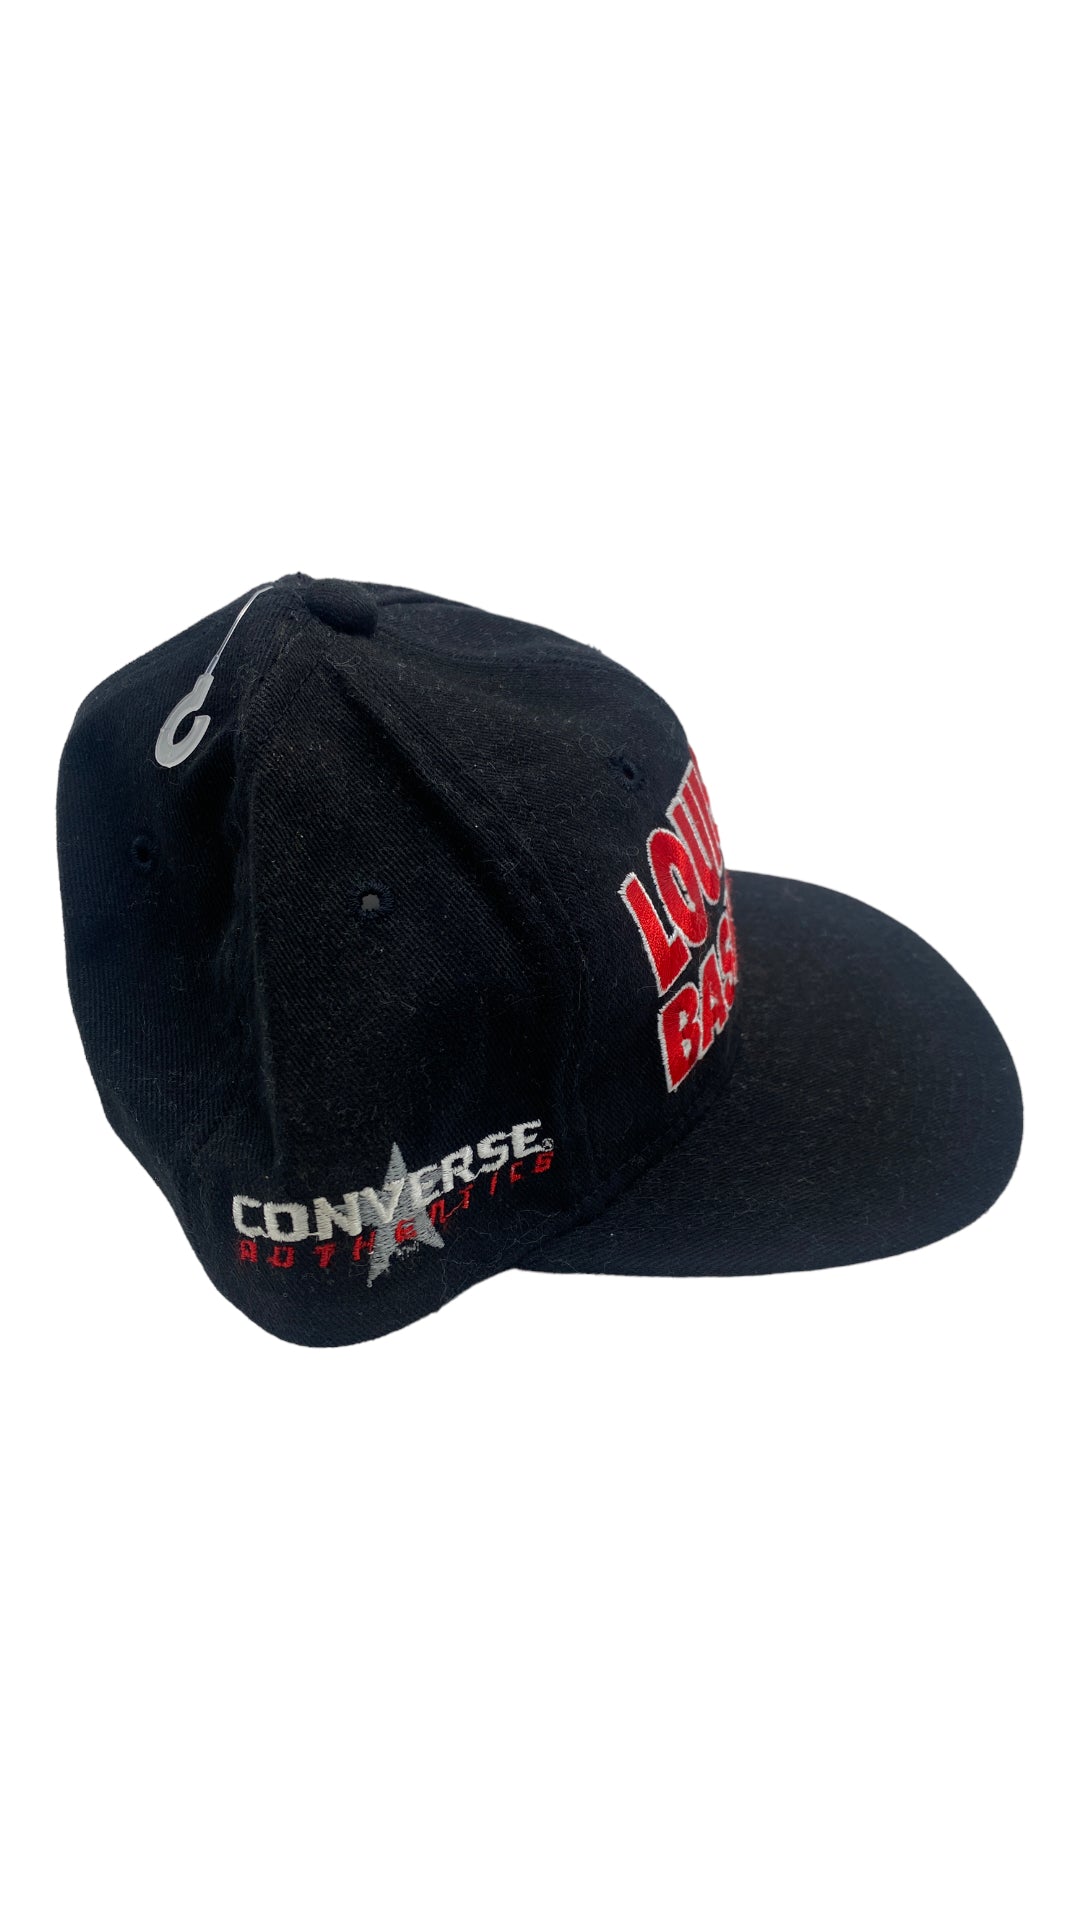 Load image into Gallery viewer, VTG Converse Louisville Basketball Snapback Hat
